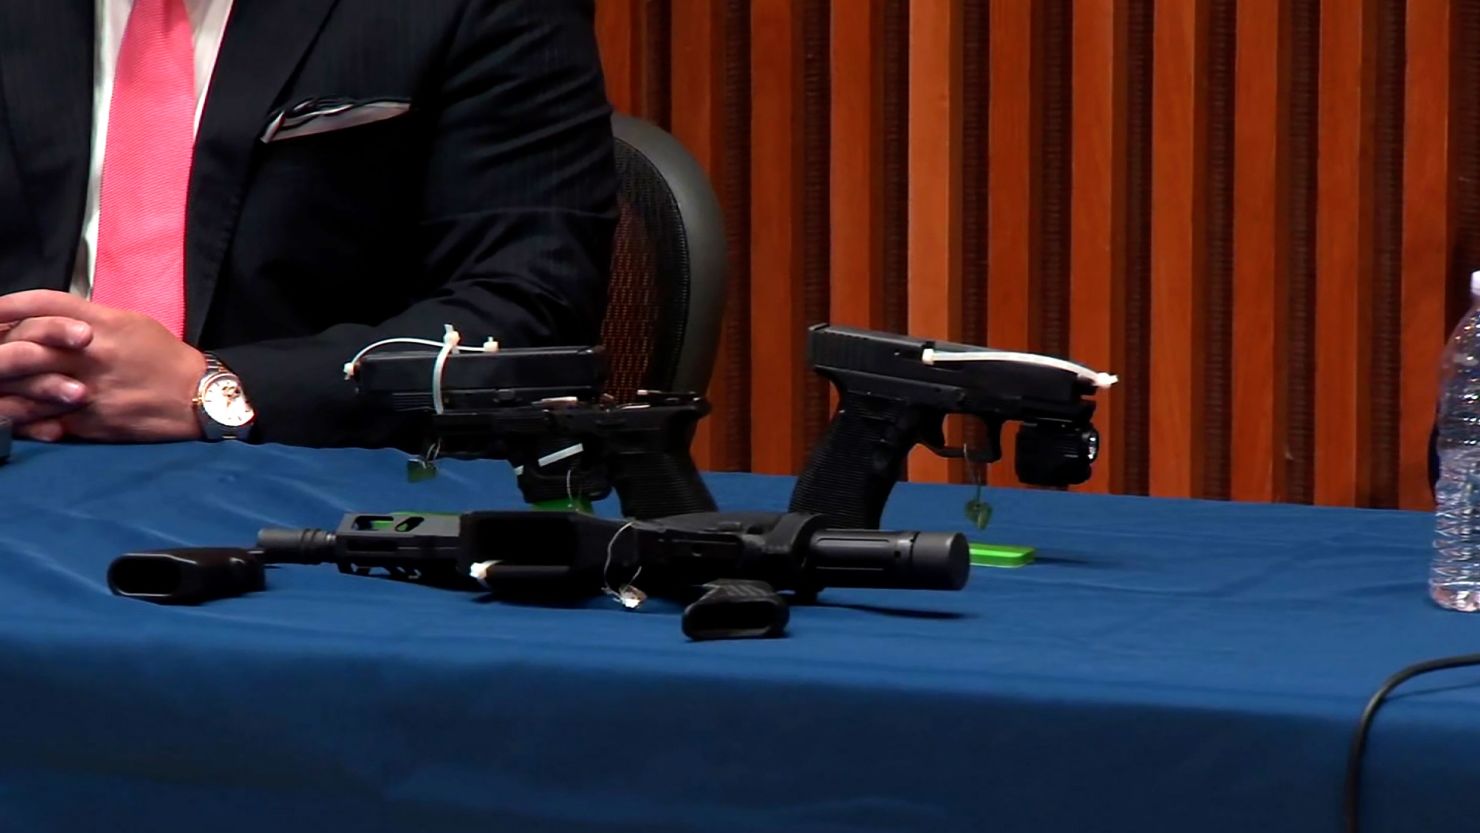 Three people, including two minors, were arrested after multiple 3D-printed firearms were found inside an East Harlem day care, police said. 